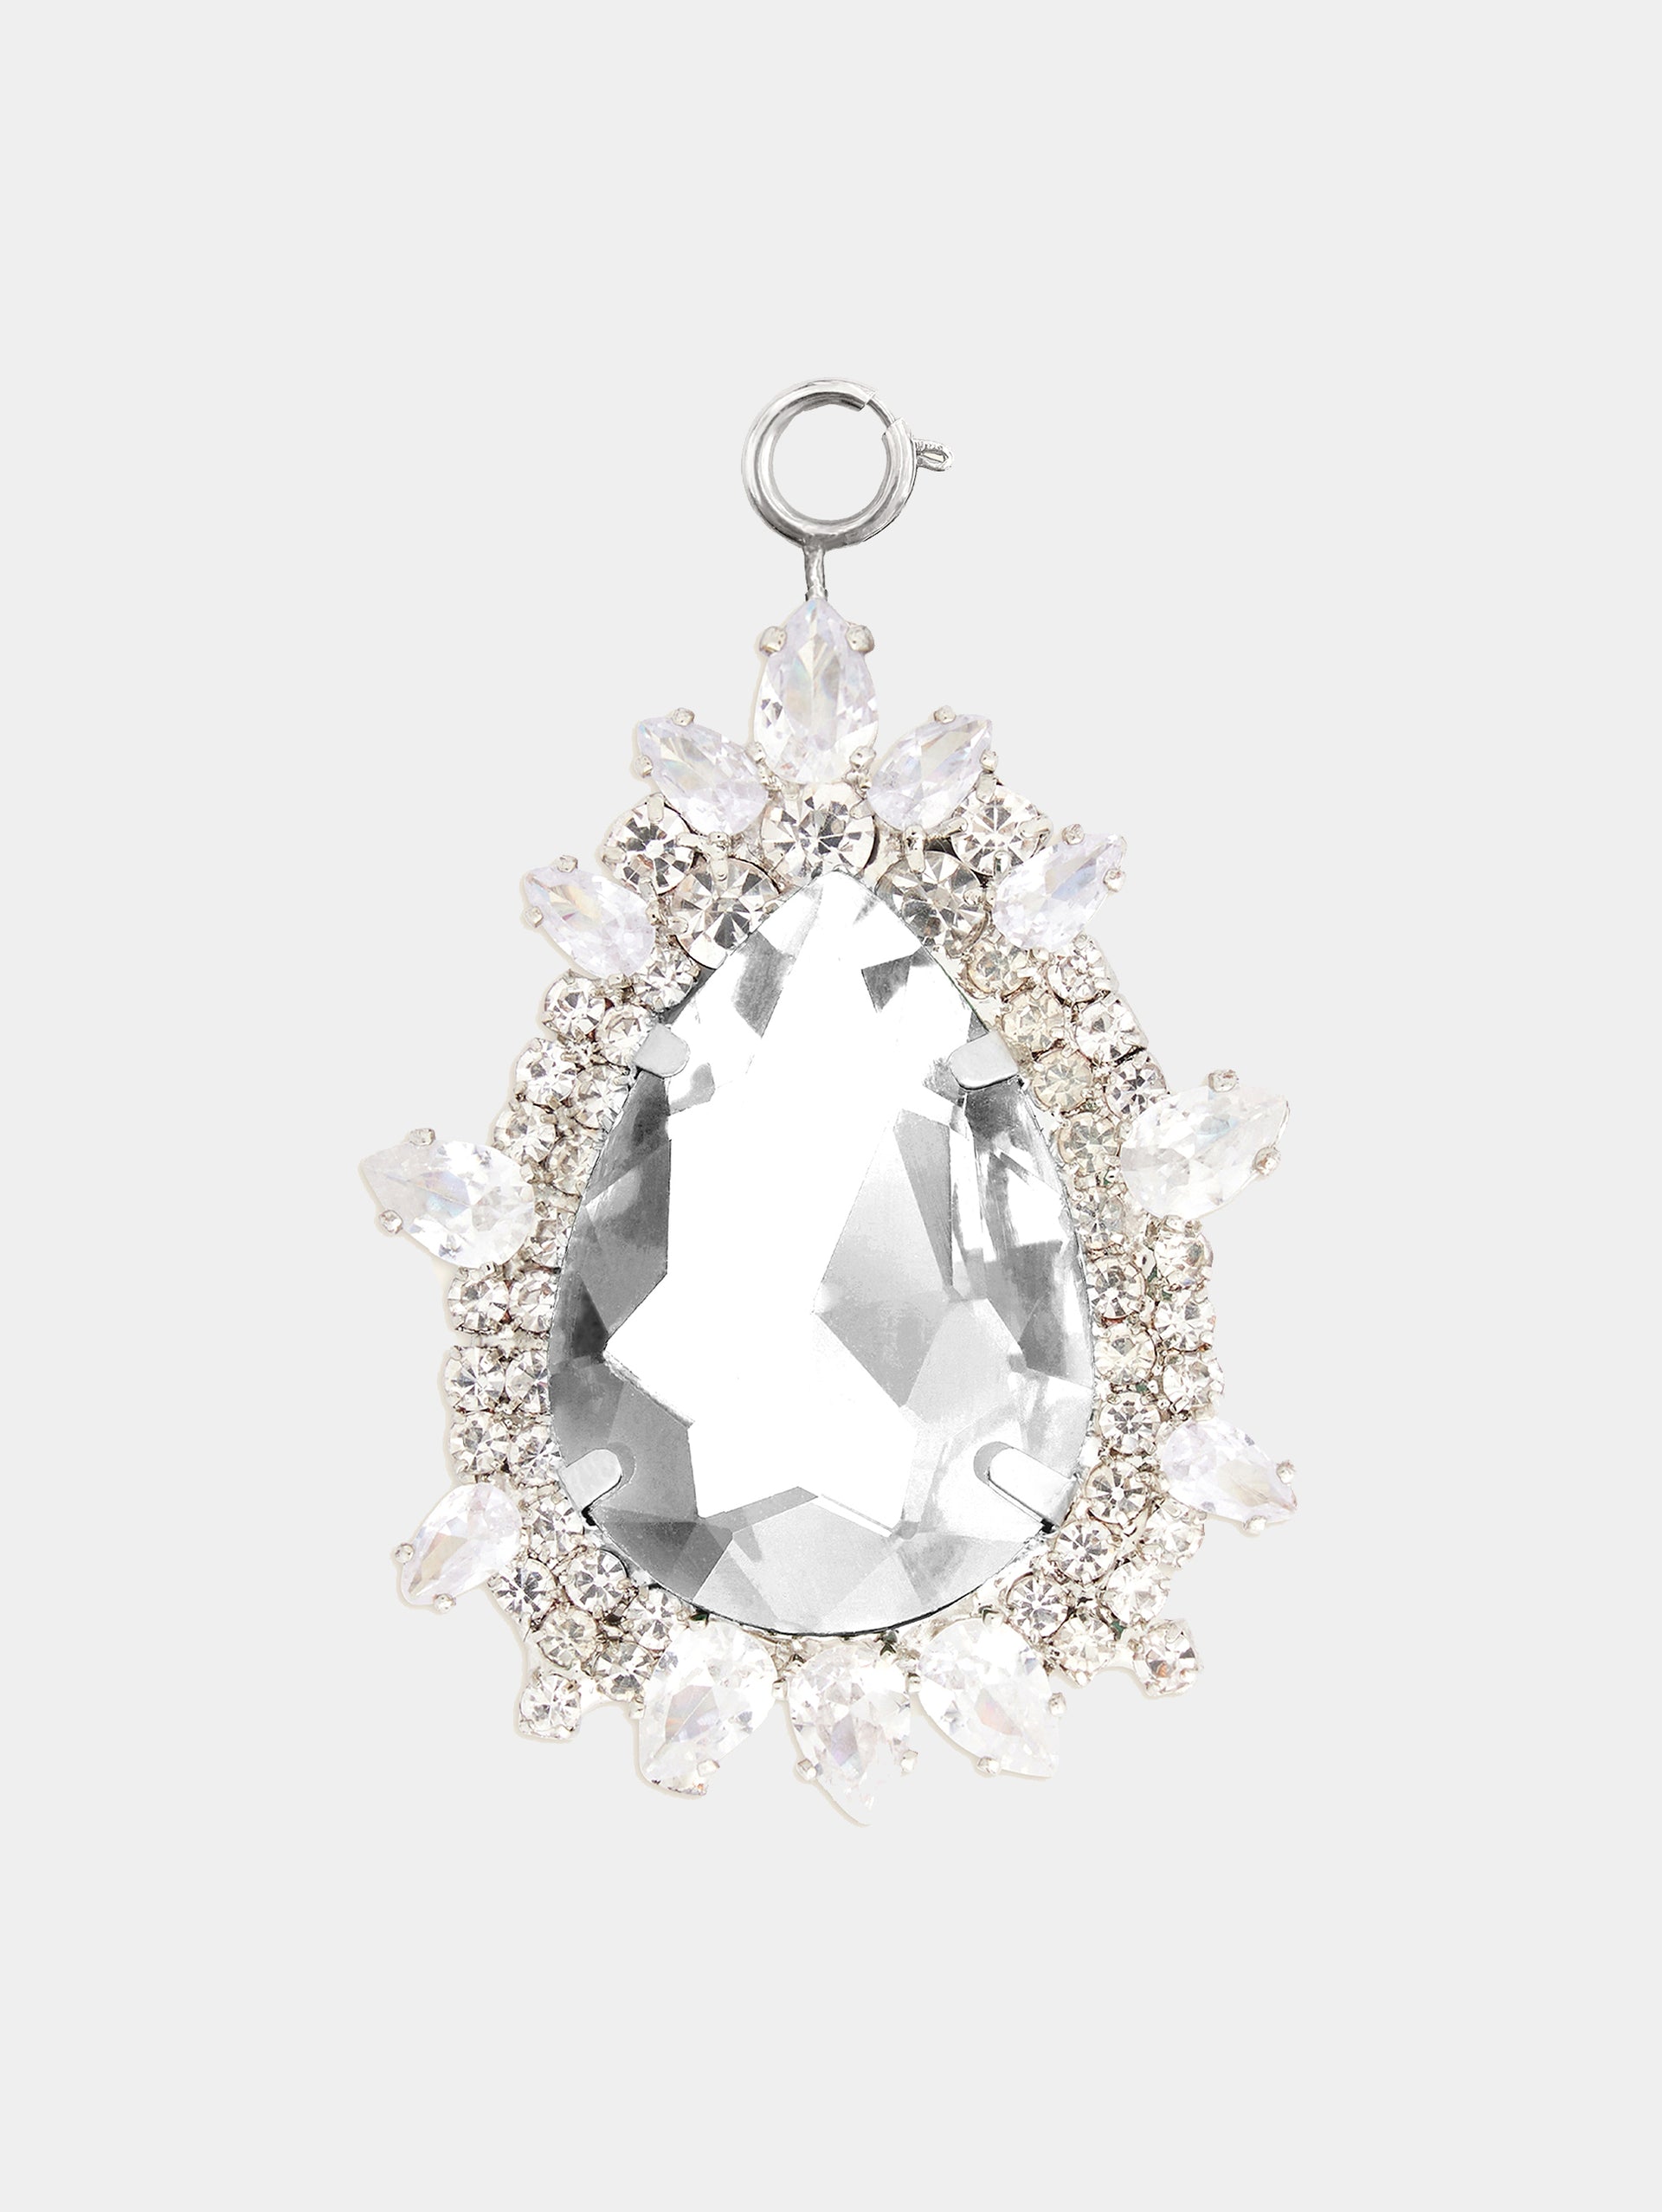 Pear shaped charm with transparent crystal